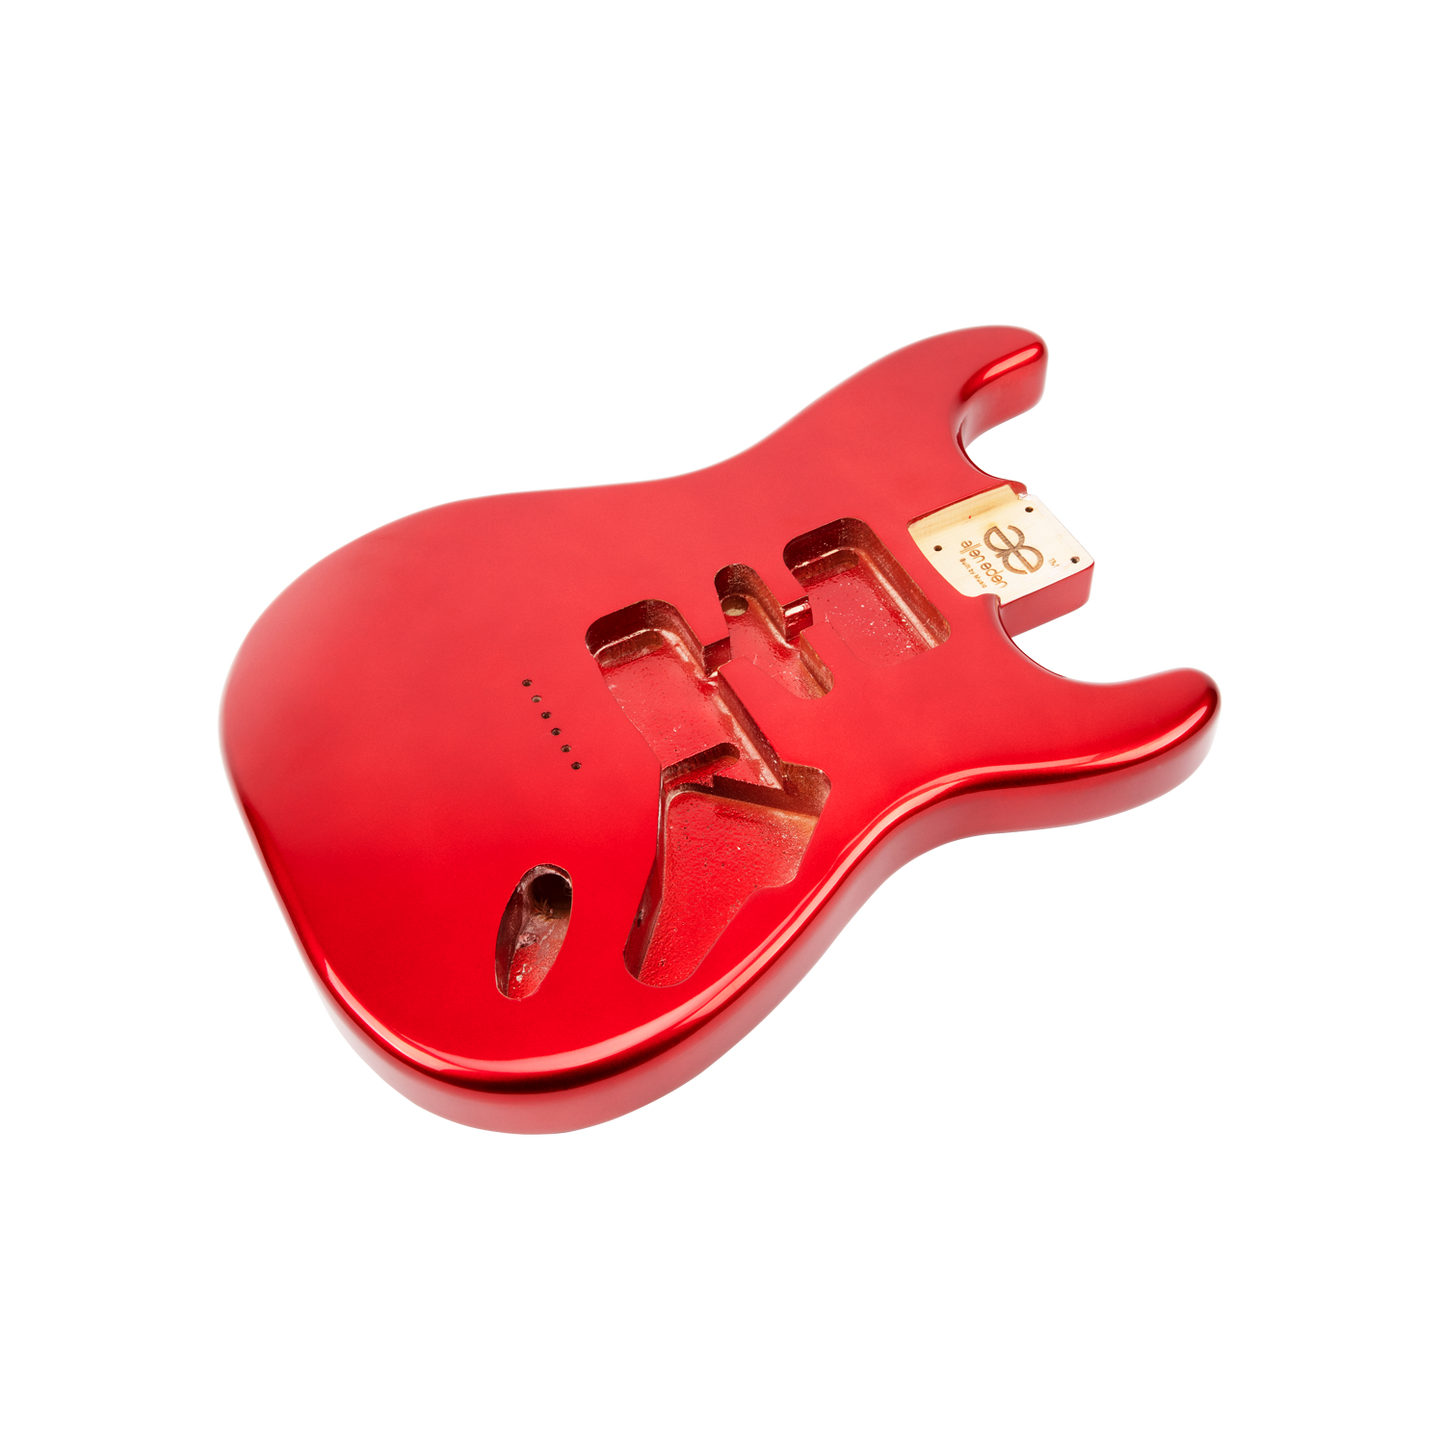 AE Guitars® S-Style Alder Replacement Guitar Body Metallic Red